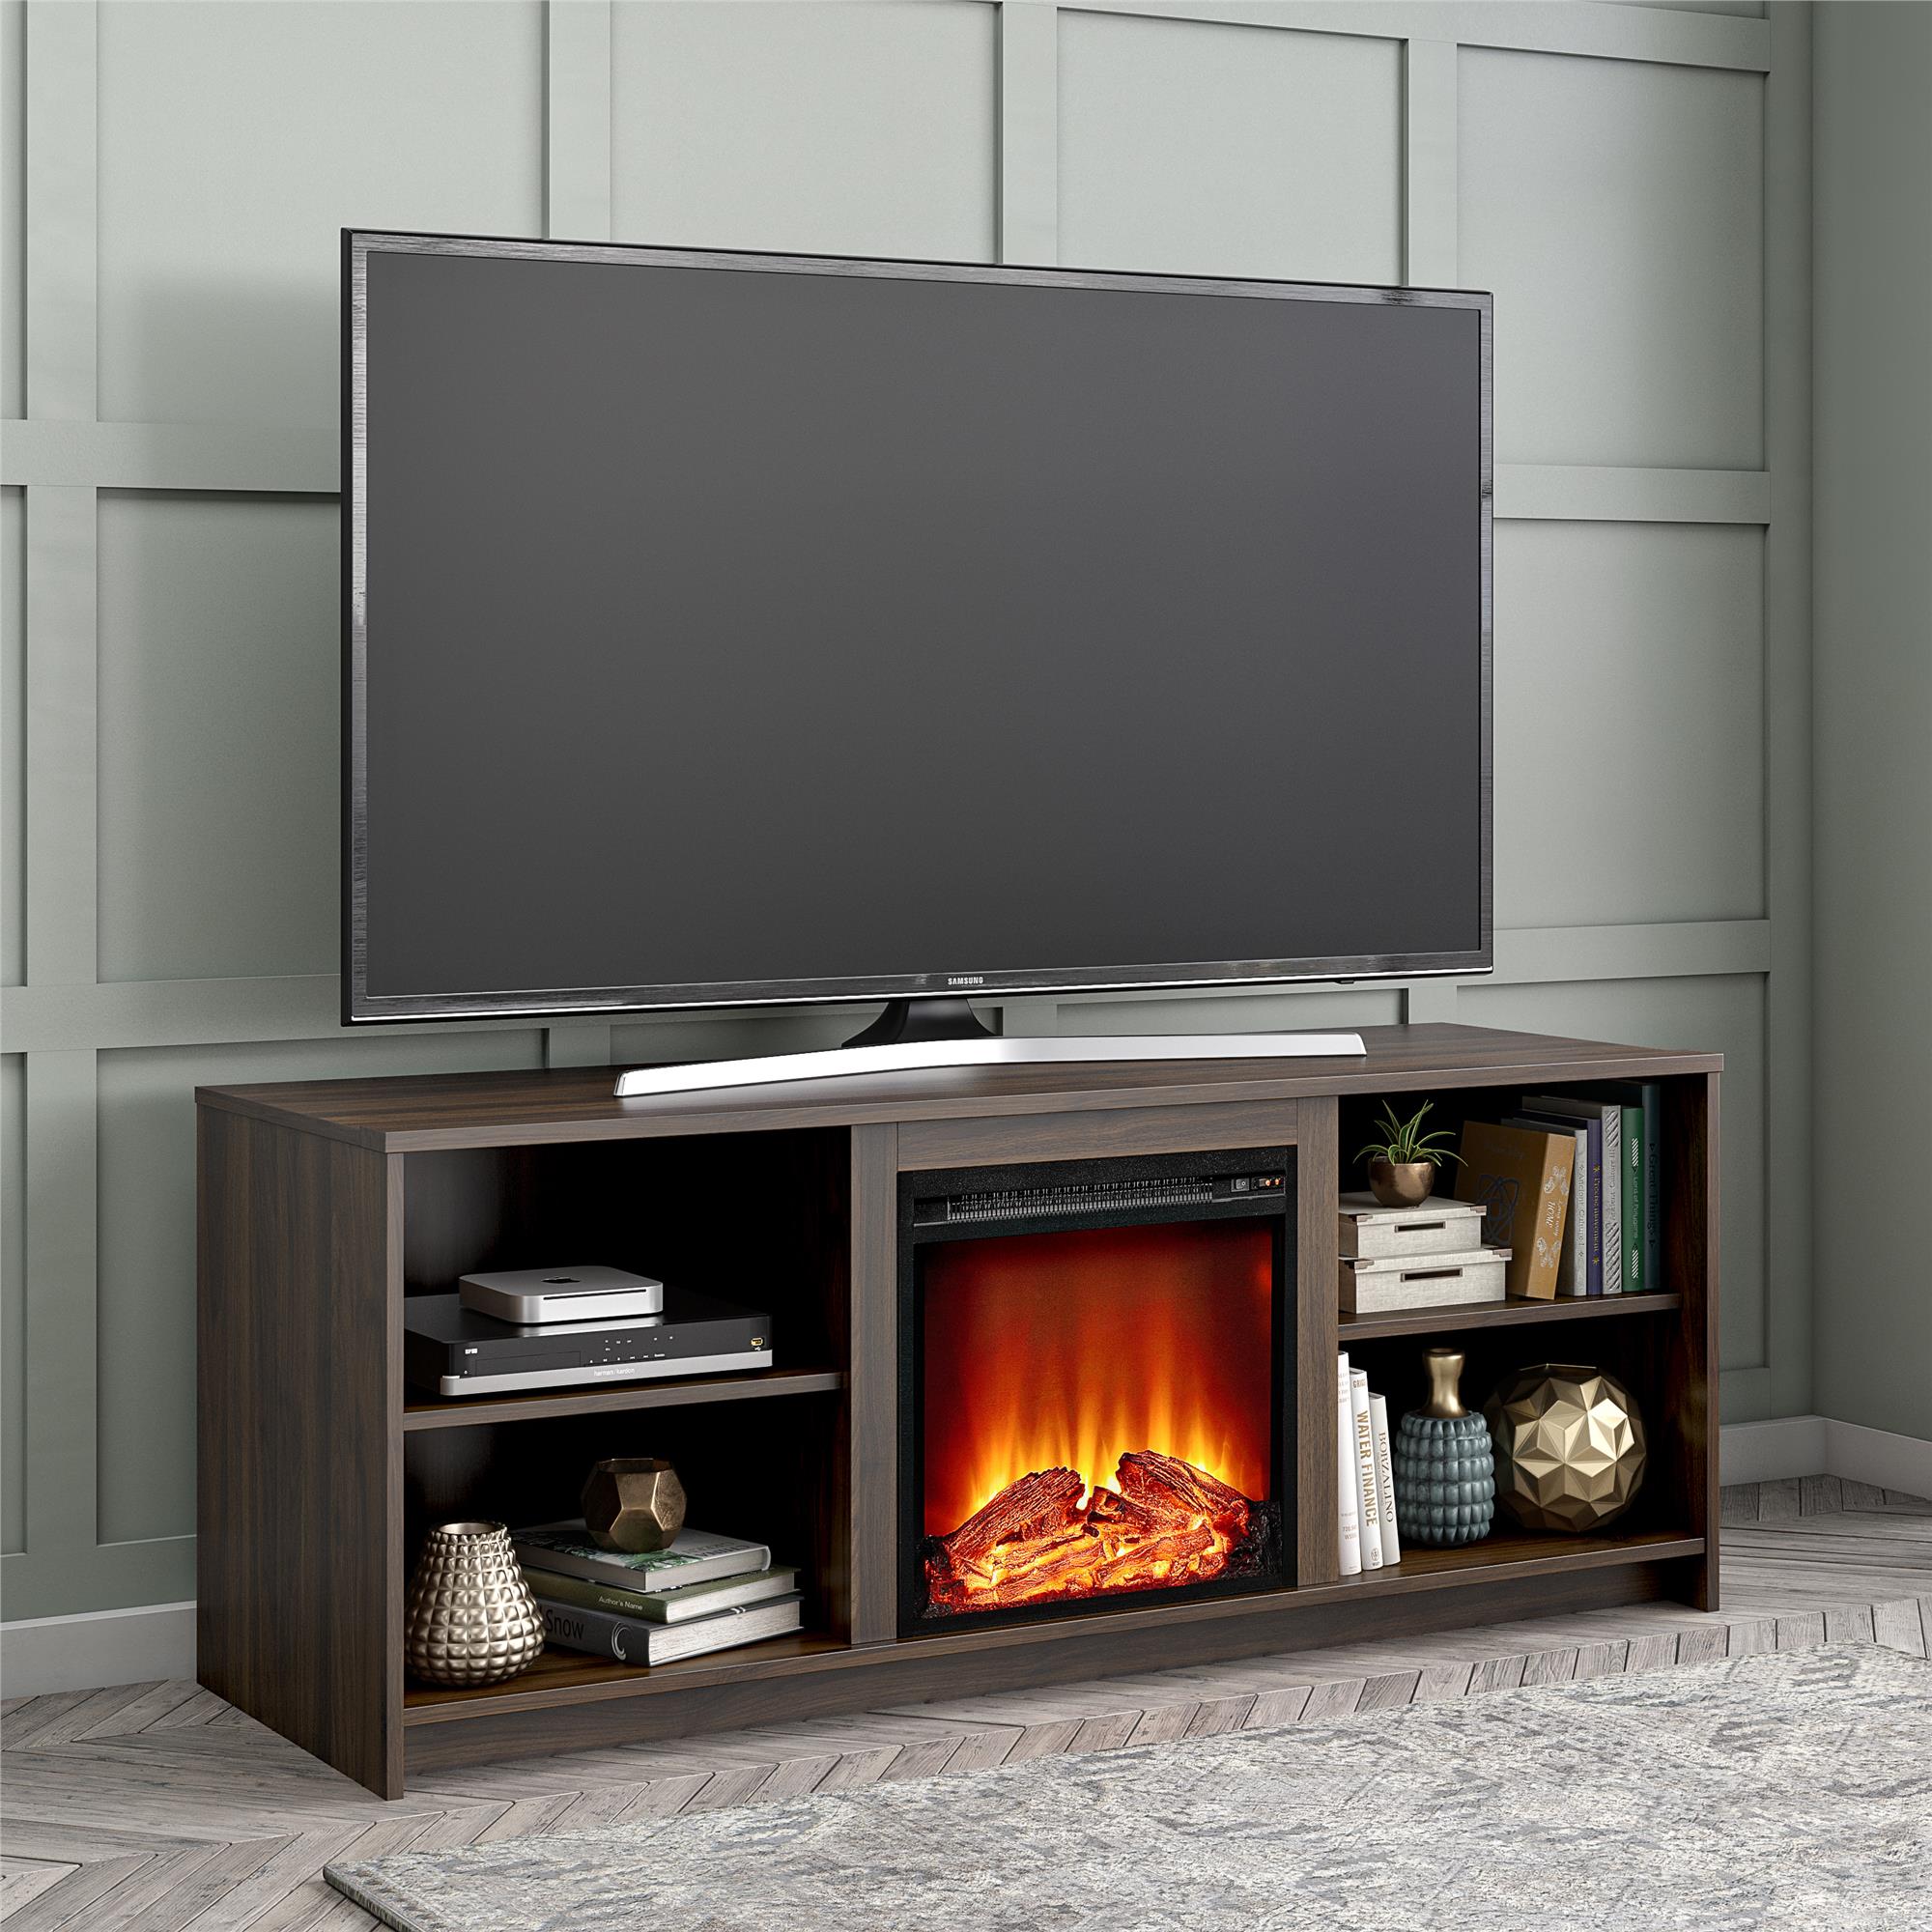 Mainstays Fireplace TV Stand for TVs up to 65", Walnut - image 2 of 11